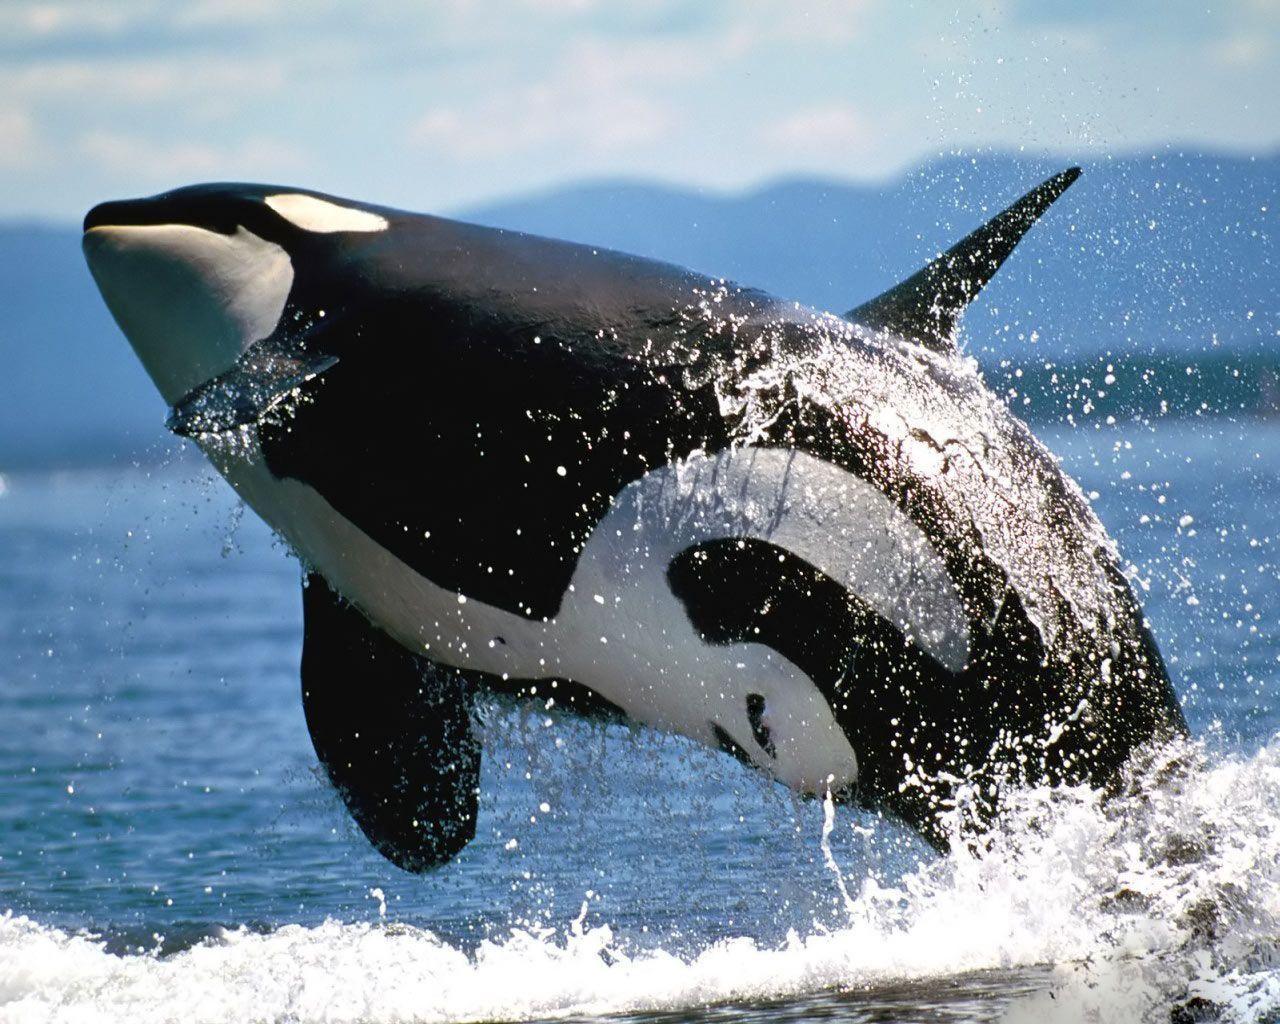 Wallpaper For > Orca Whale Wallpaper